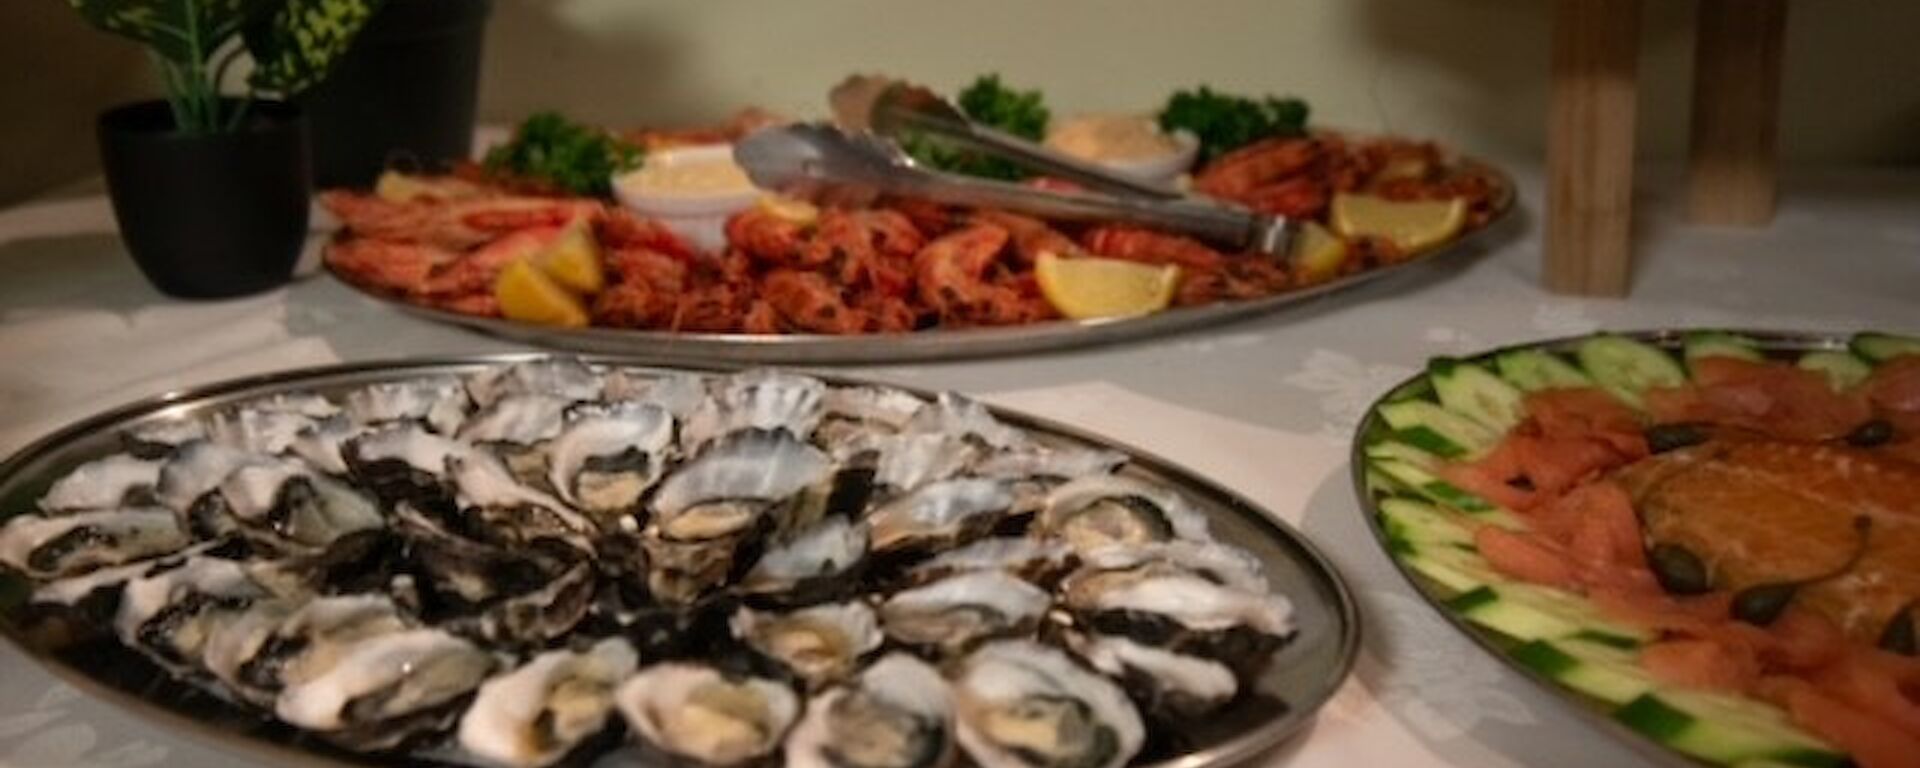 silver trays of oysters, smoked salmon and prawns on a white tablecloth